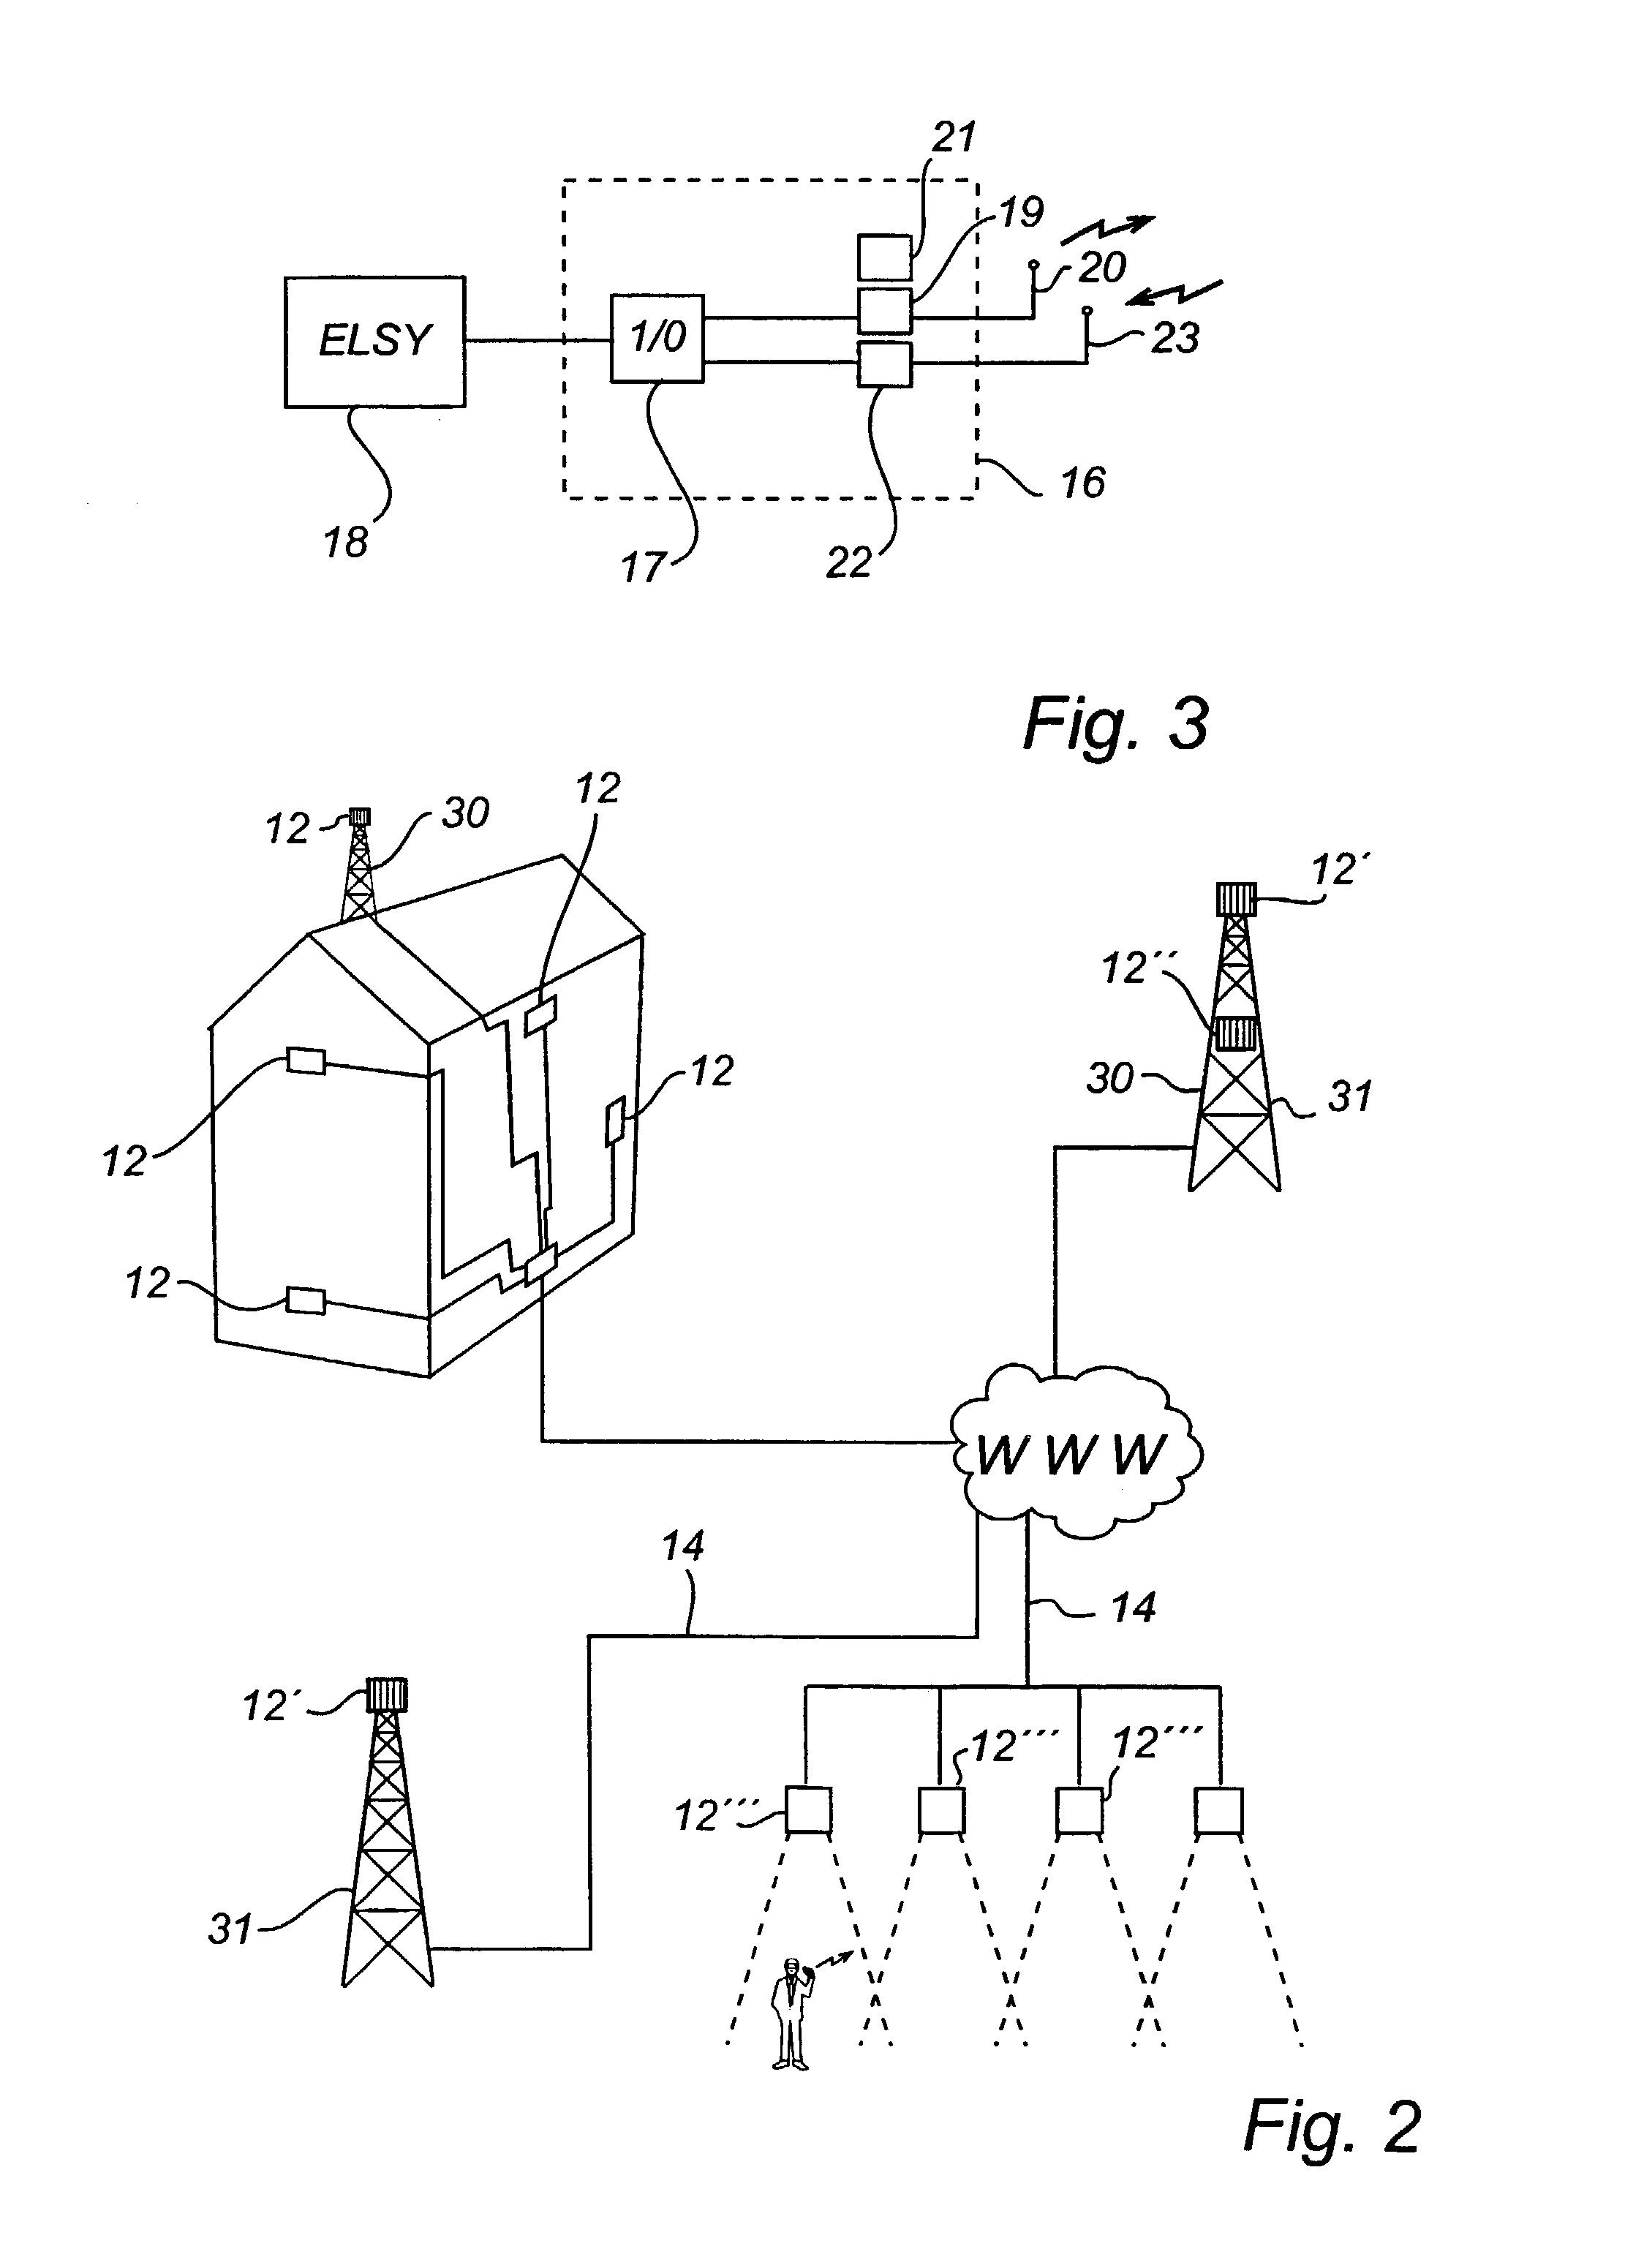 Method and system for radio communication with mobile units